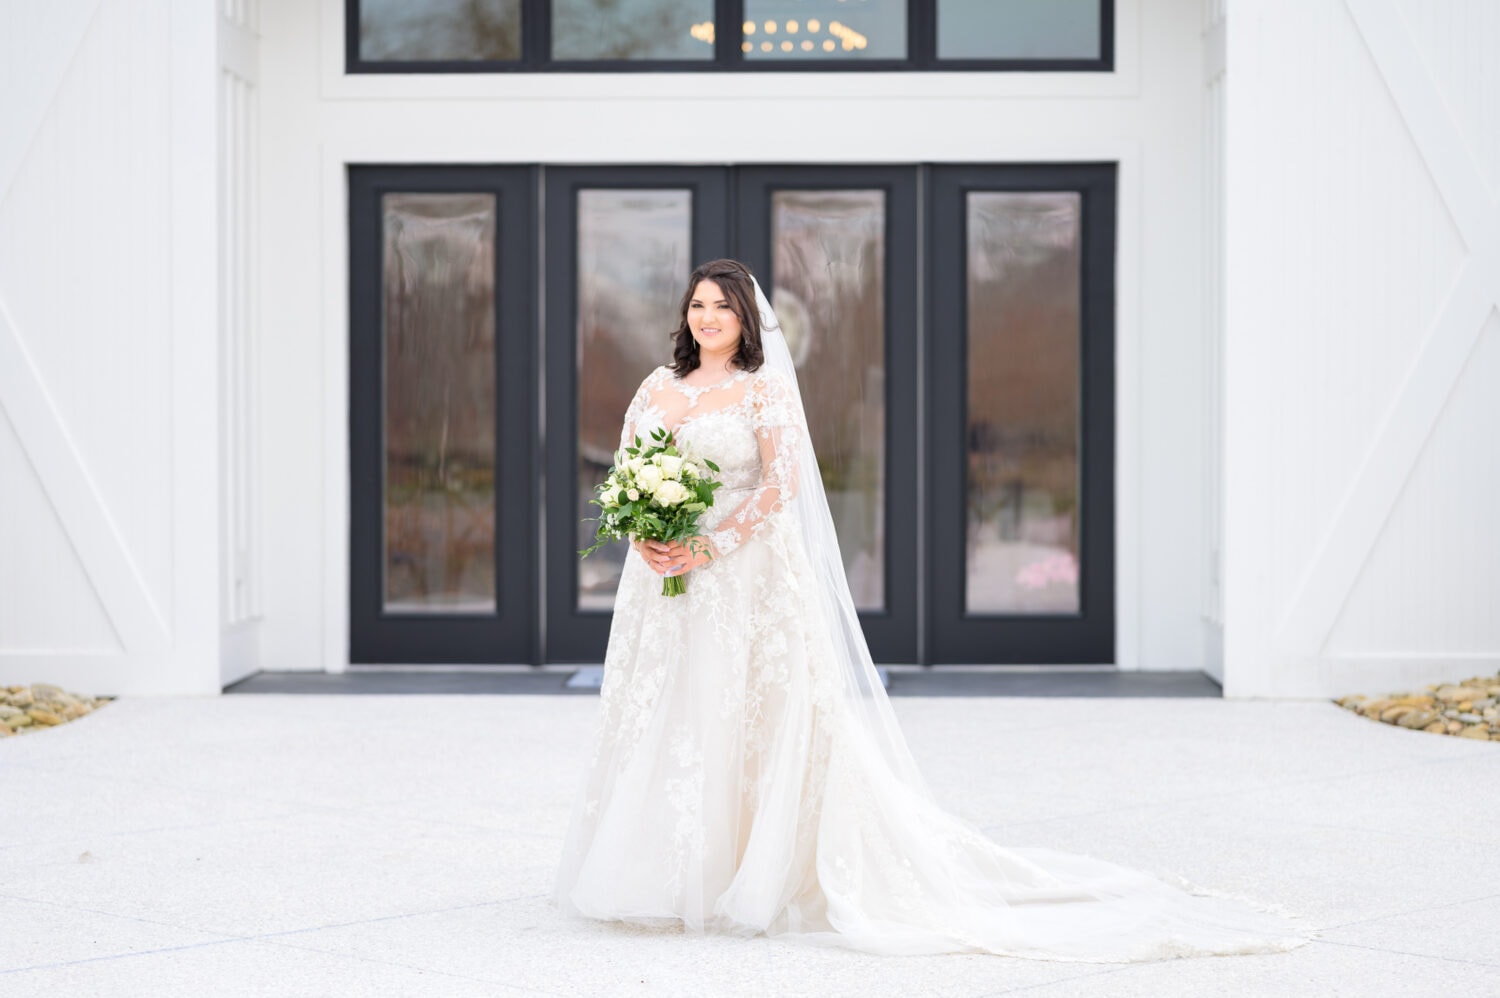 Bride standing in front of venue doors - The Venue at White Oaks Farm